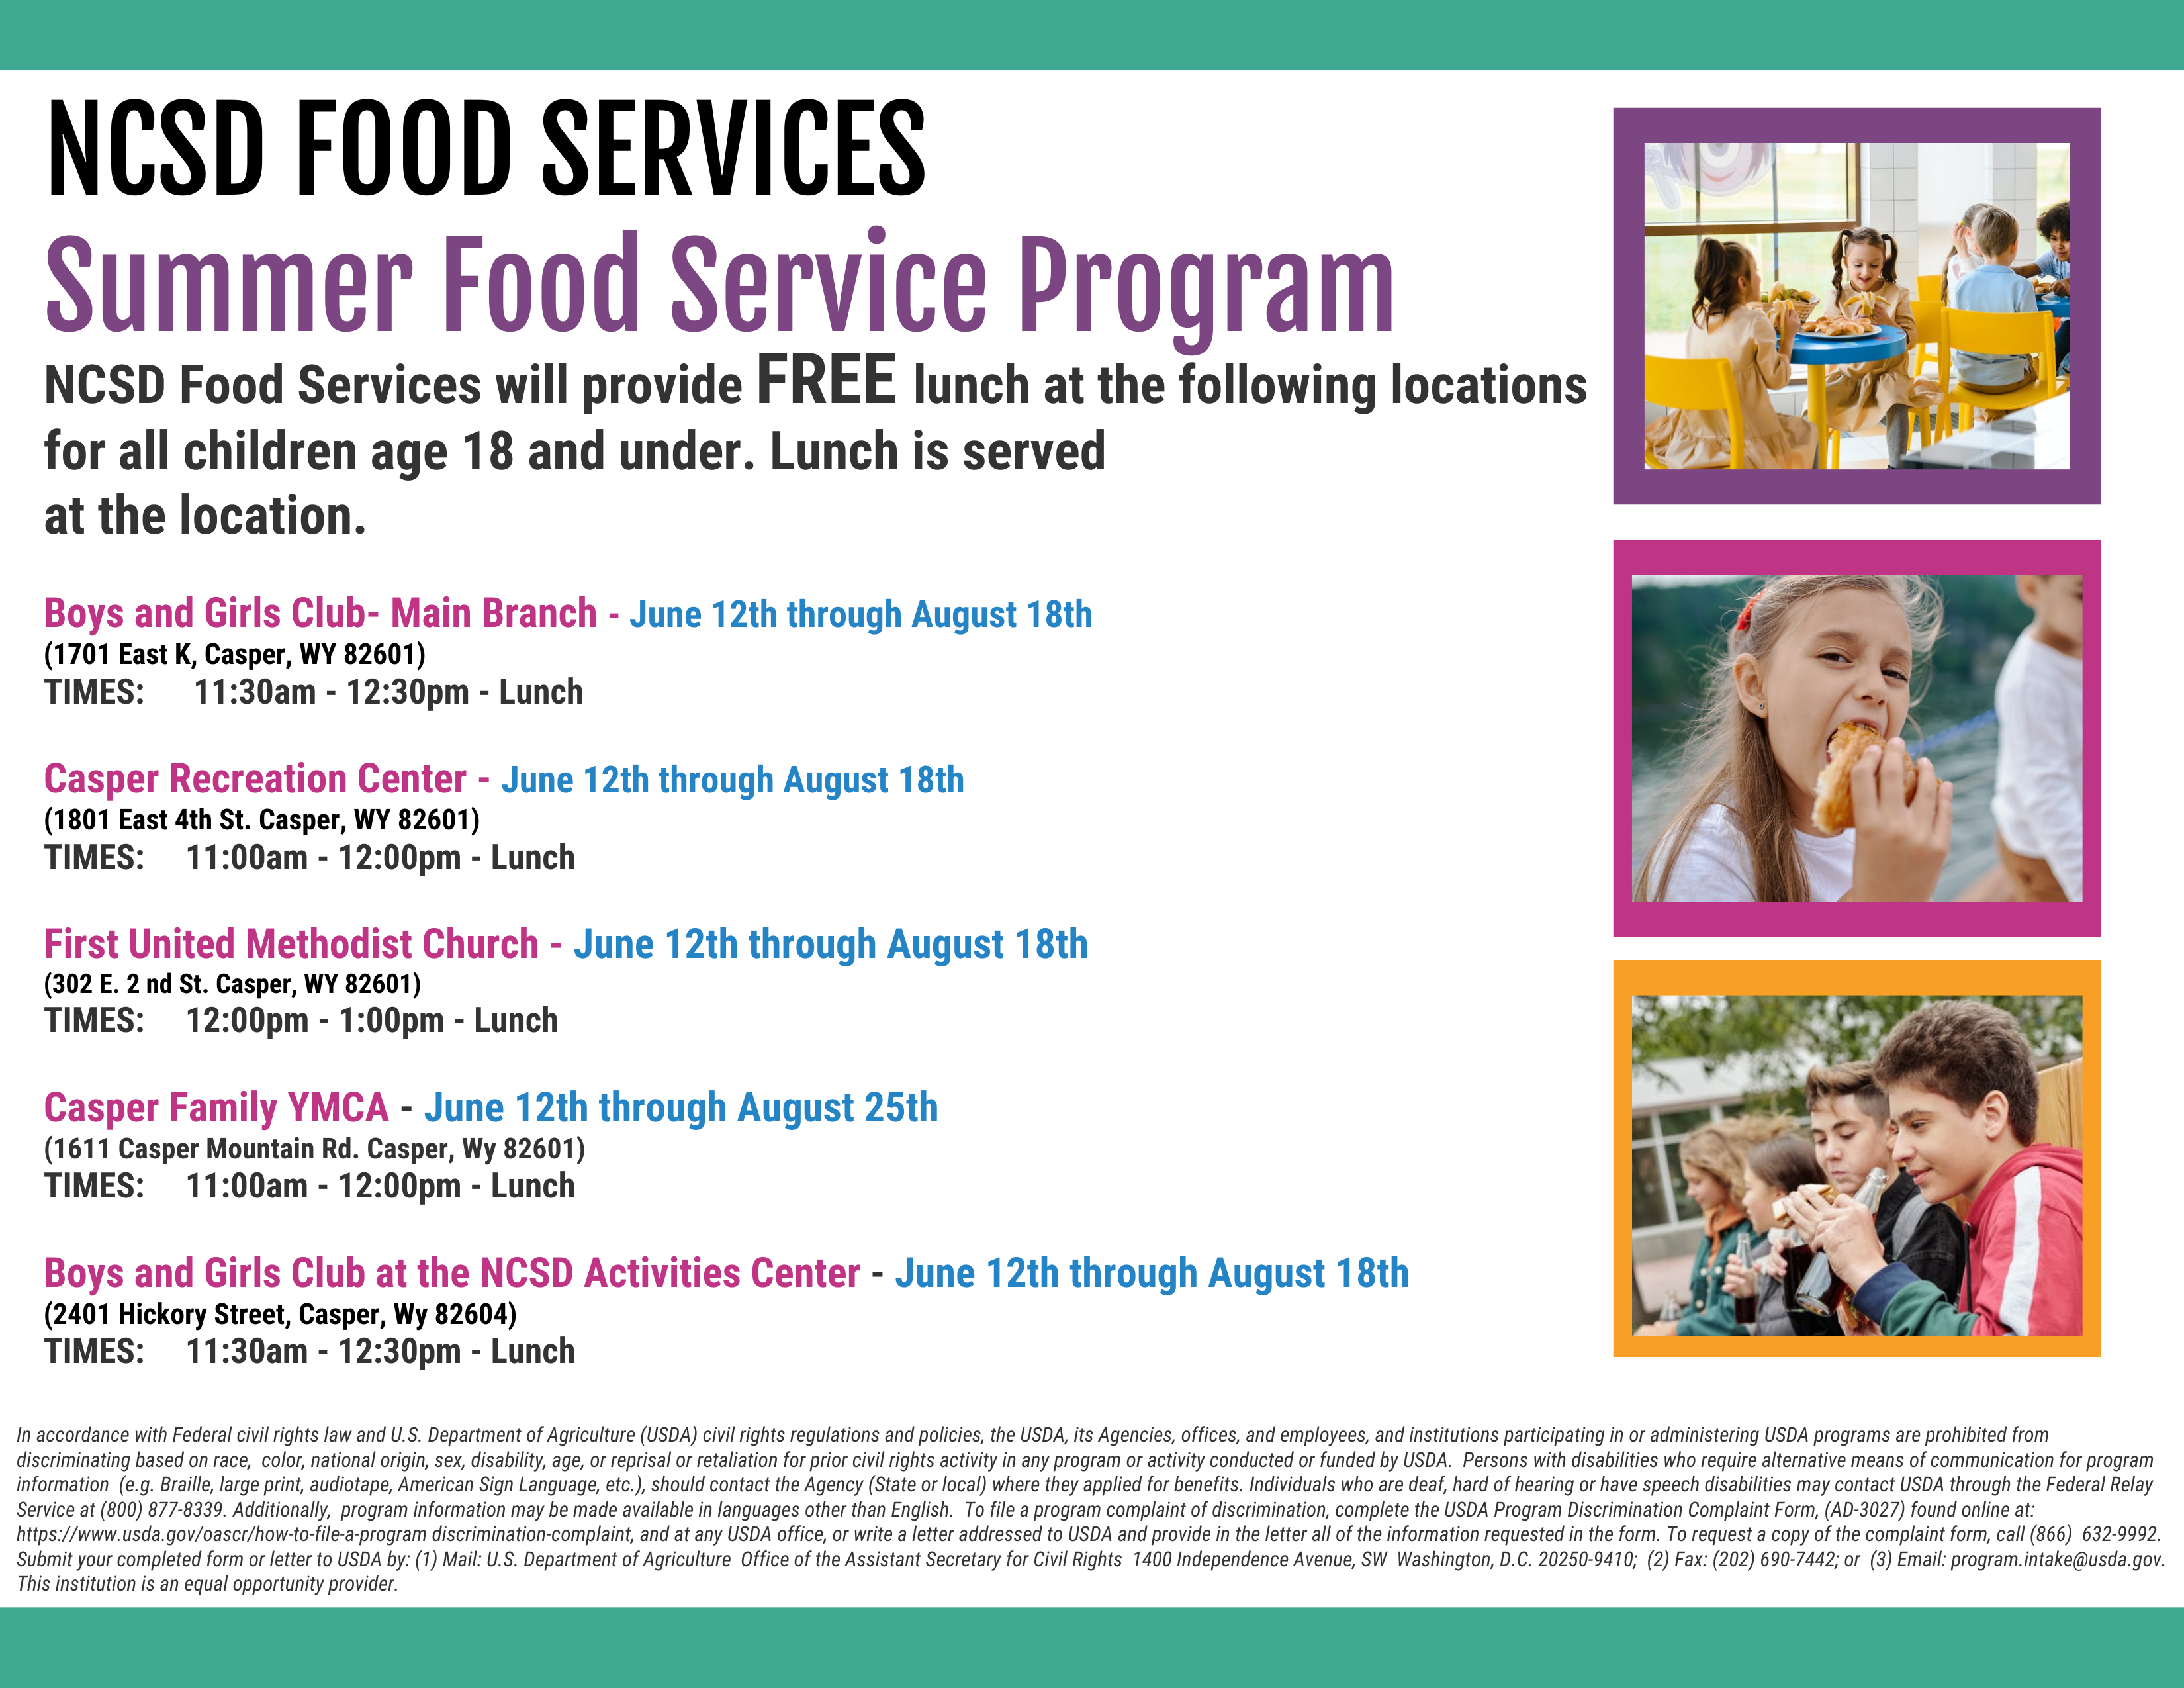 NCSD Food Services Summer Lunch Program locations, dates, and times